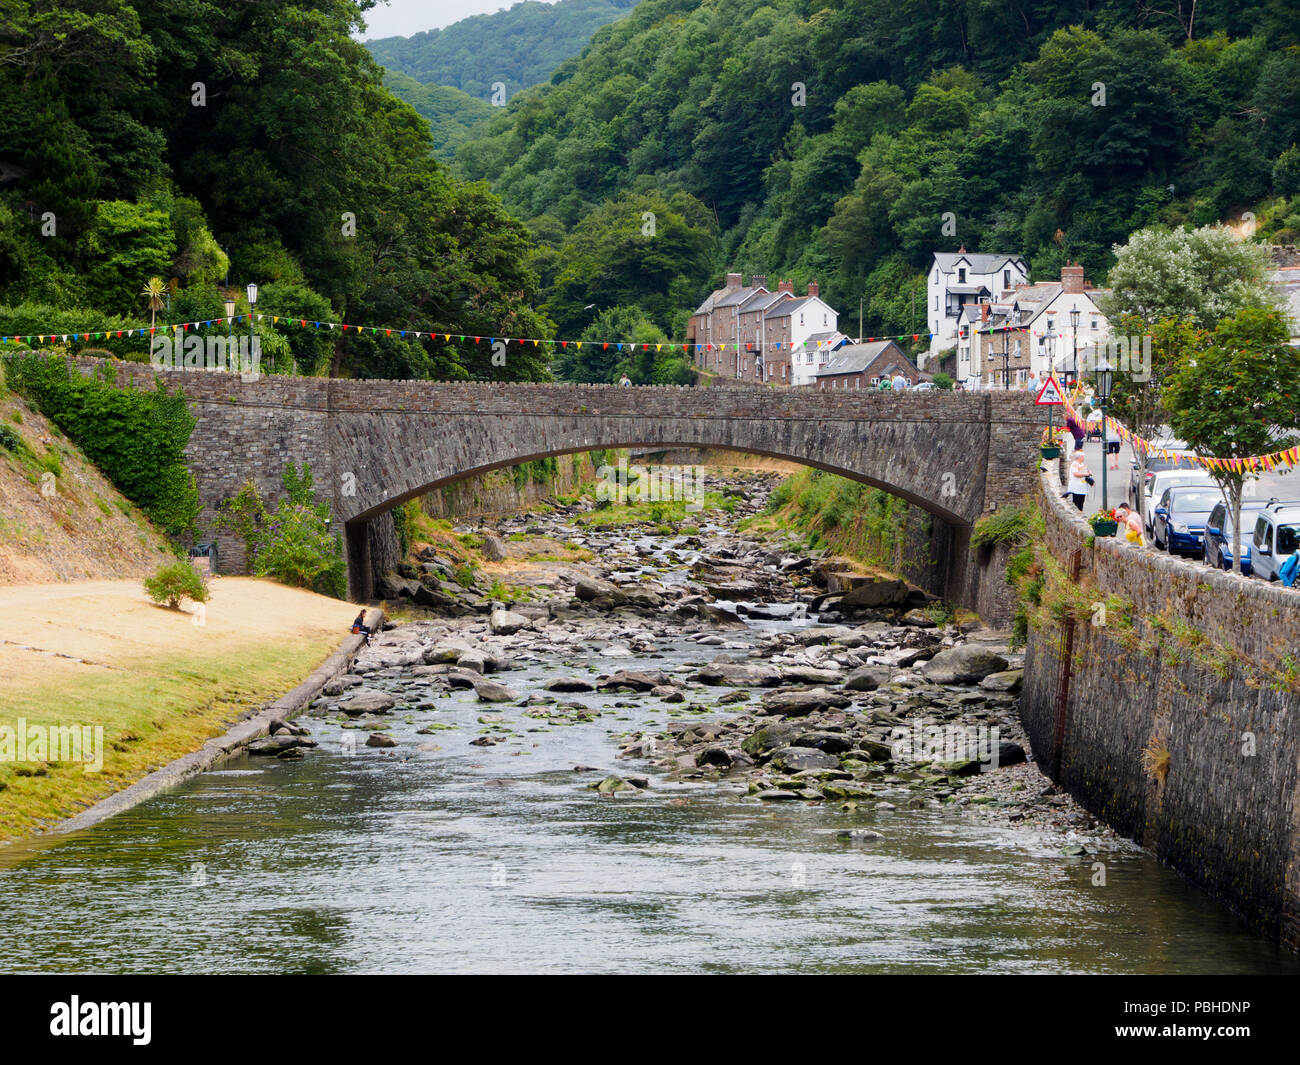 A39 Road bridge arches over the boulder strewn East Lyn river at Lynmouth, Devon, UK Stock Photo